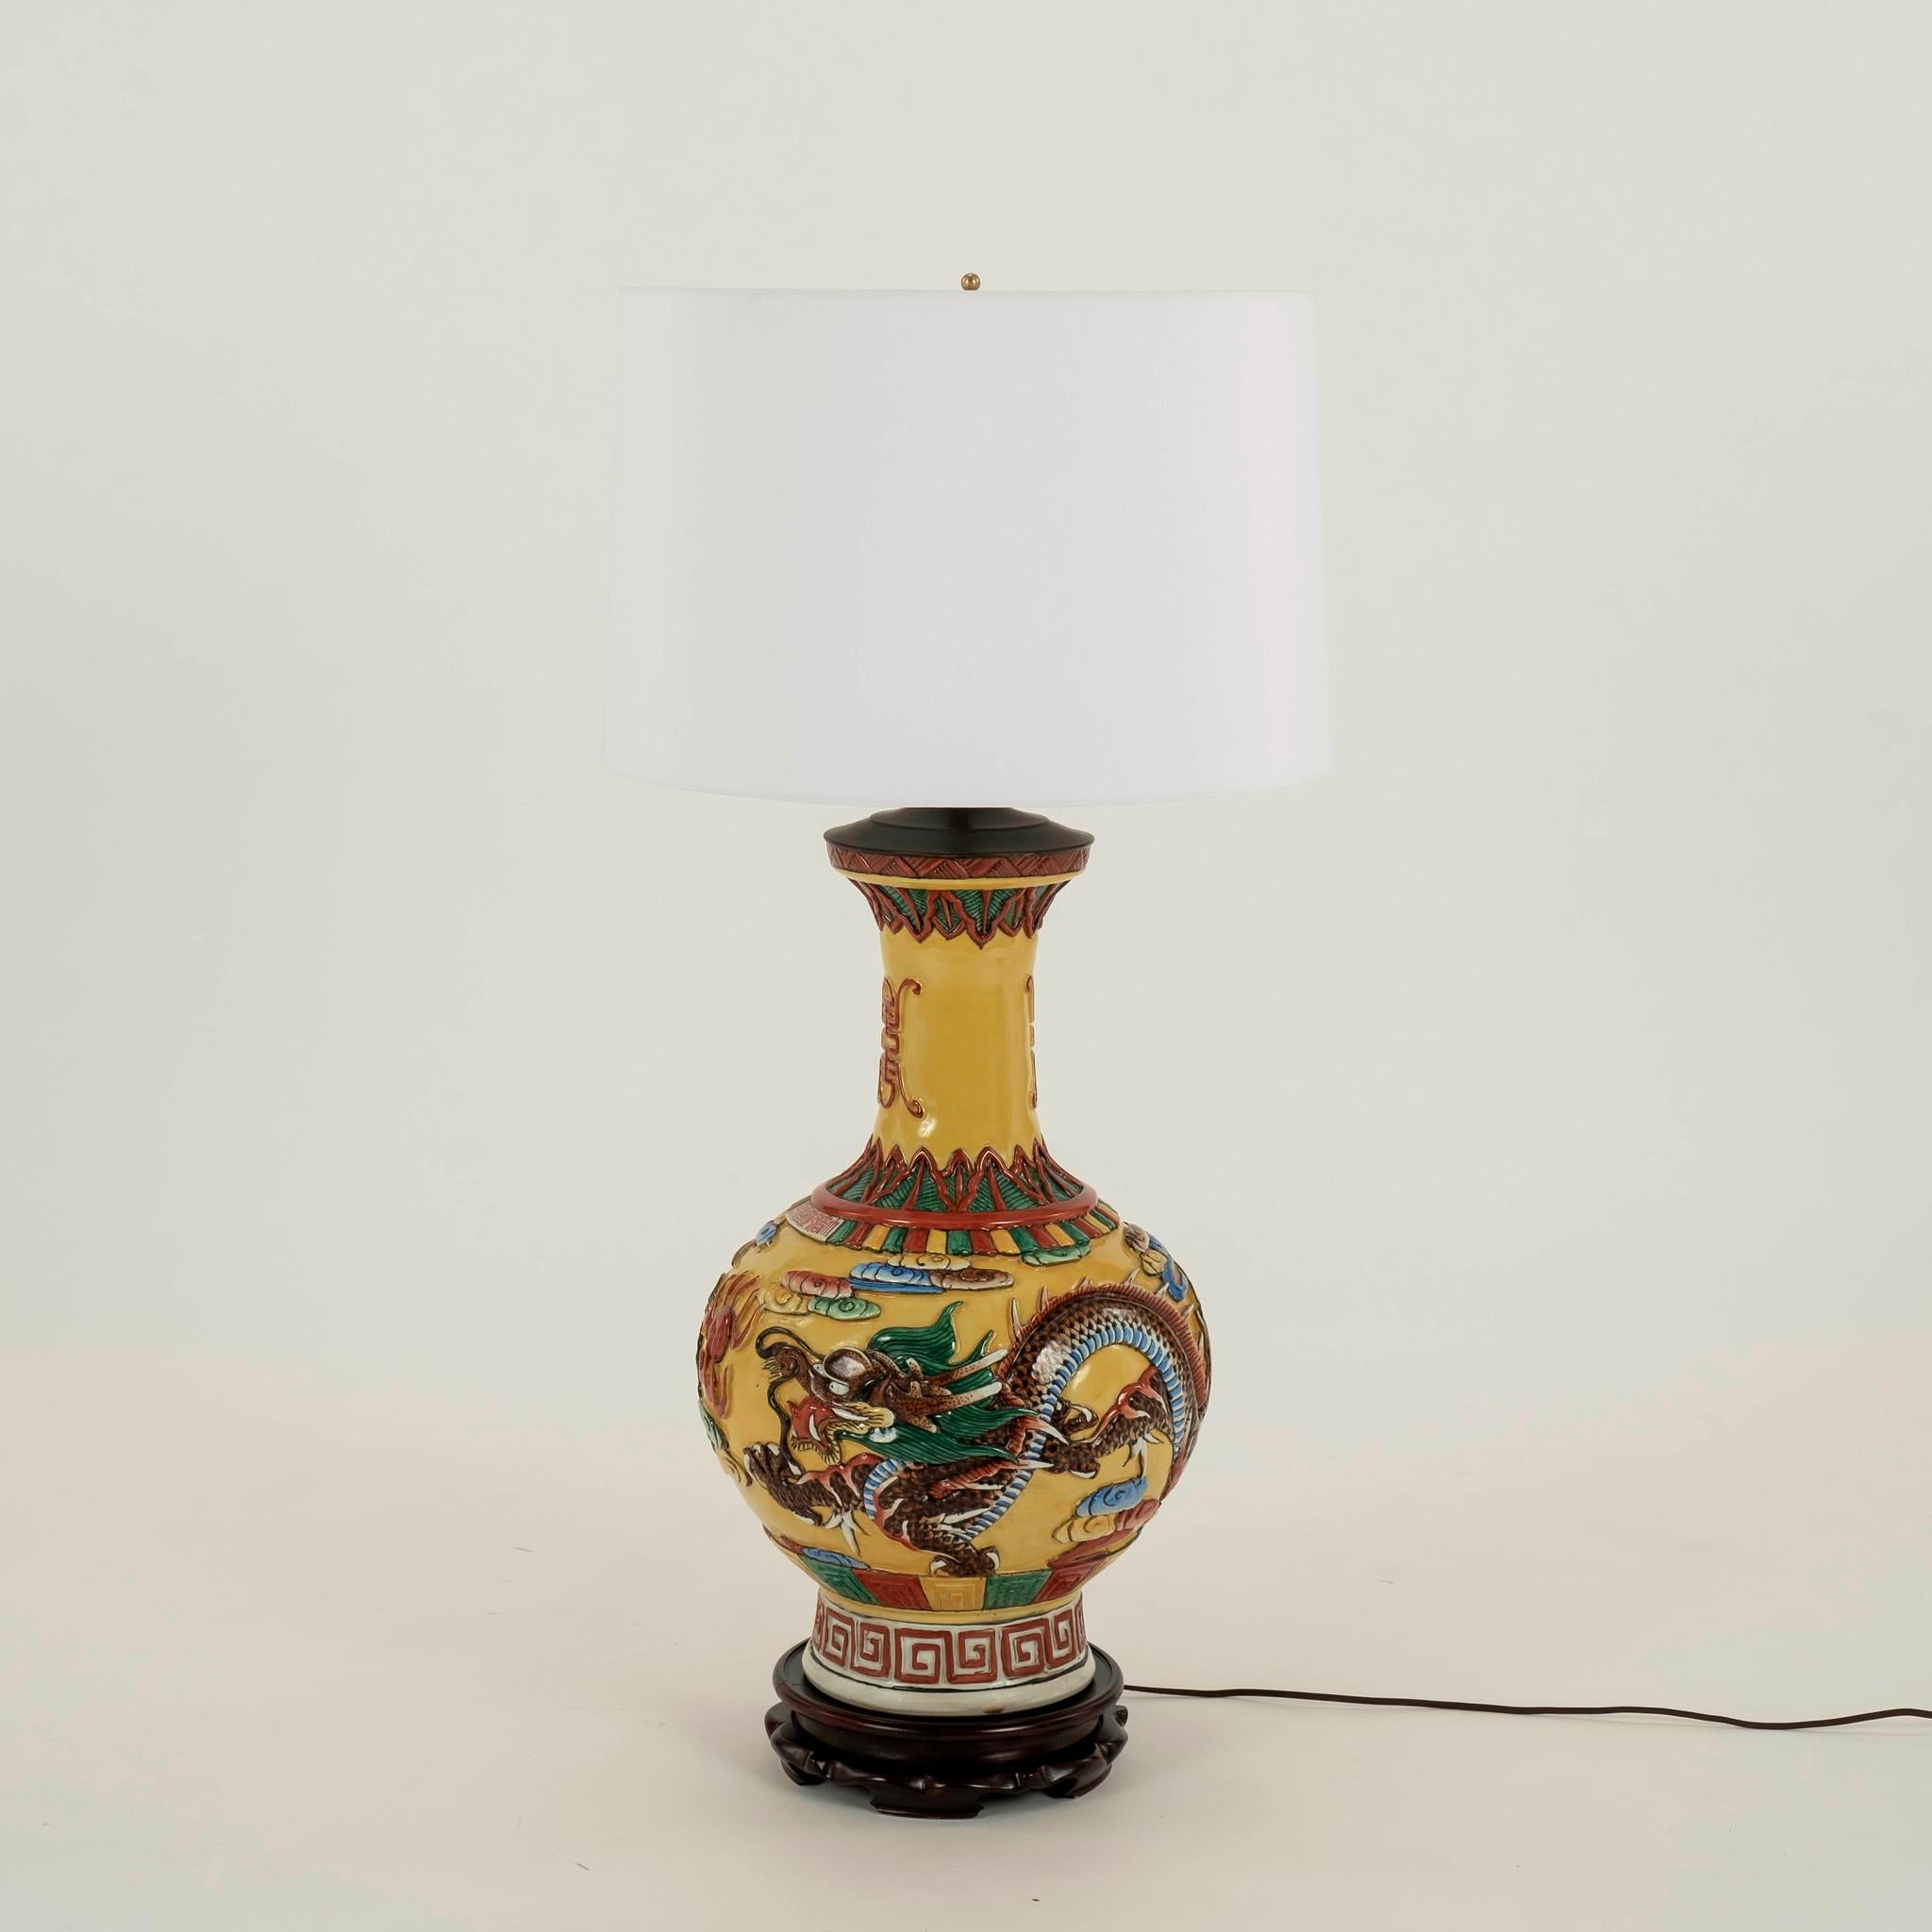 Pair carved porcelain gourd lamps with white shades. Intricately incised porcelain detailed with bold multi colored auspicious dragons, clouds and greek key over a bold yellow background.